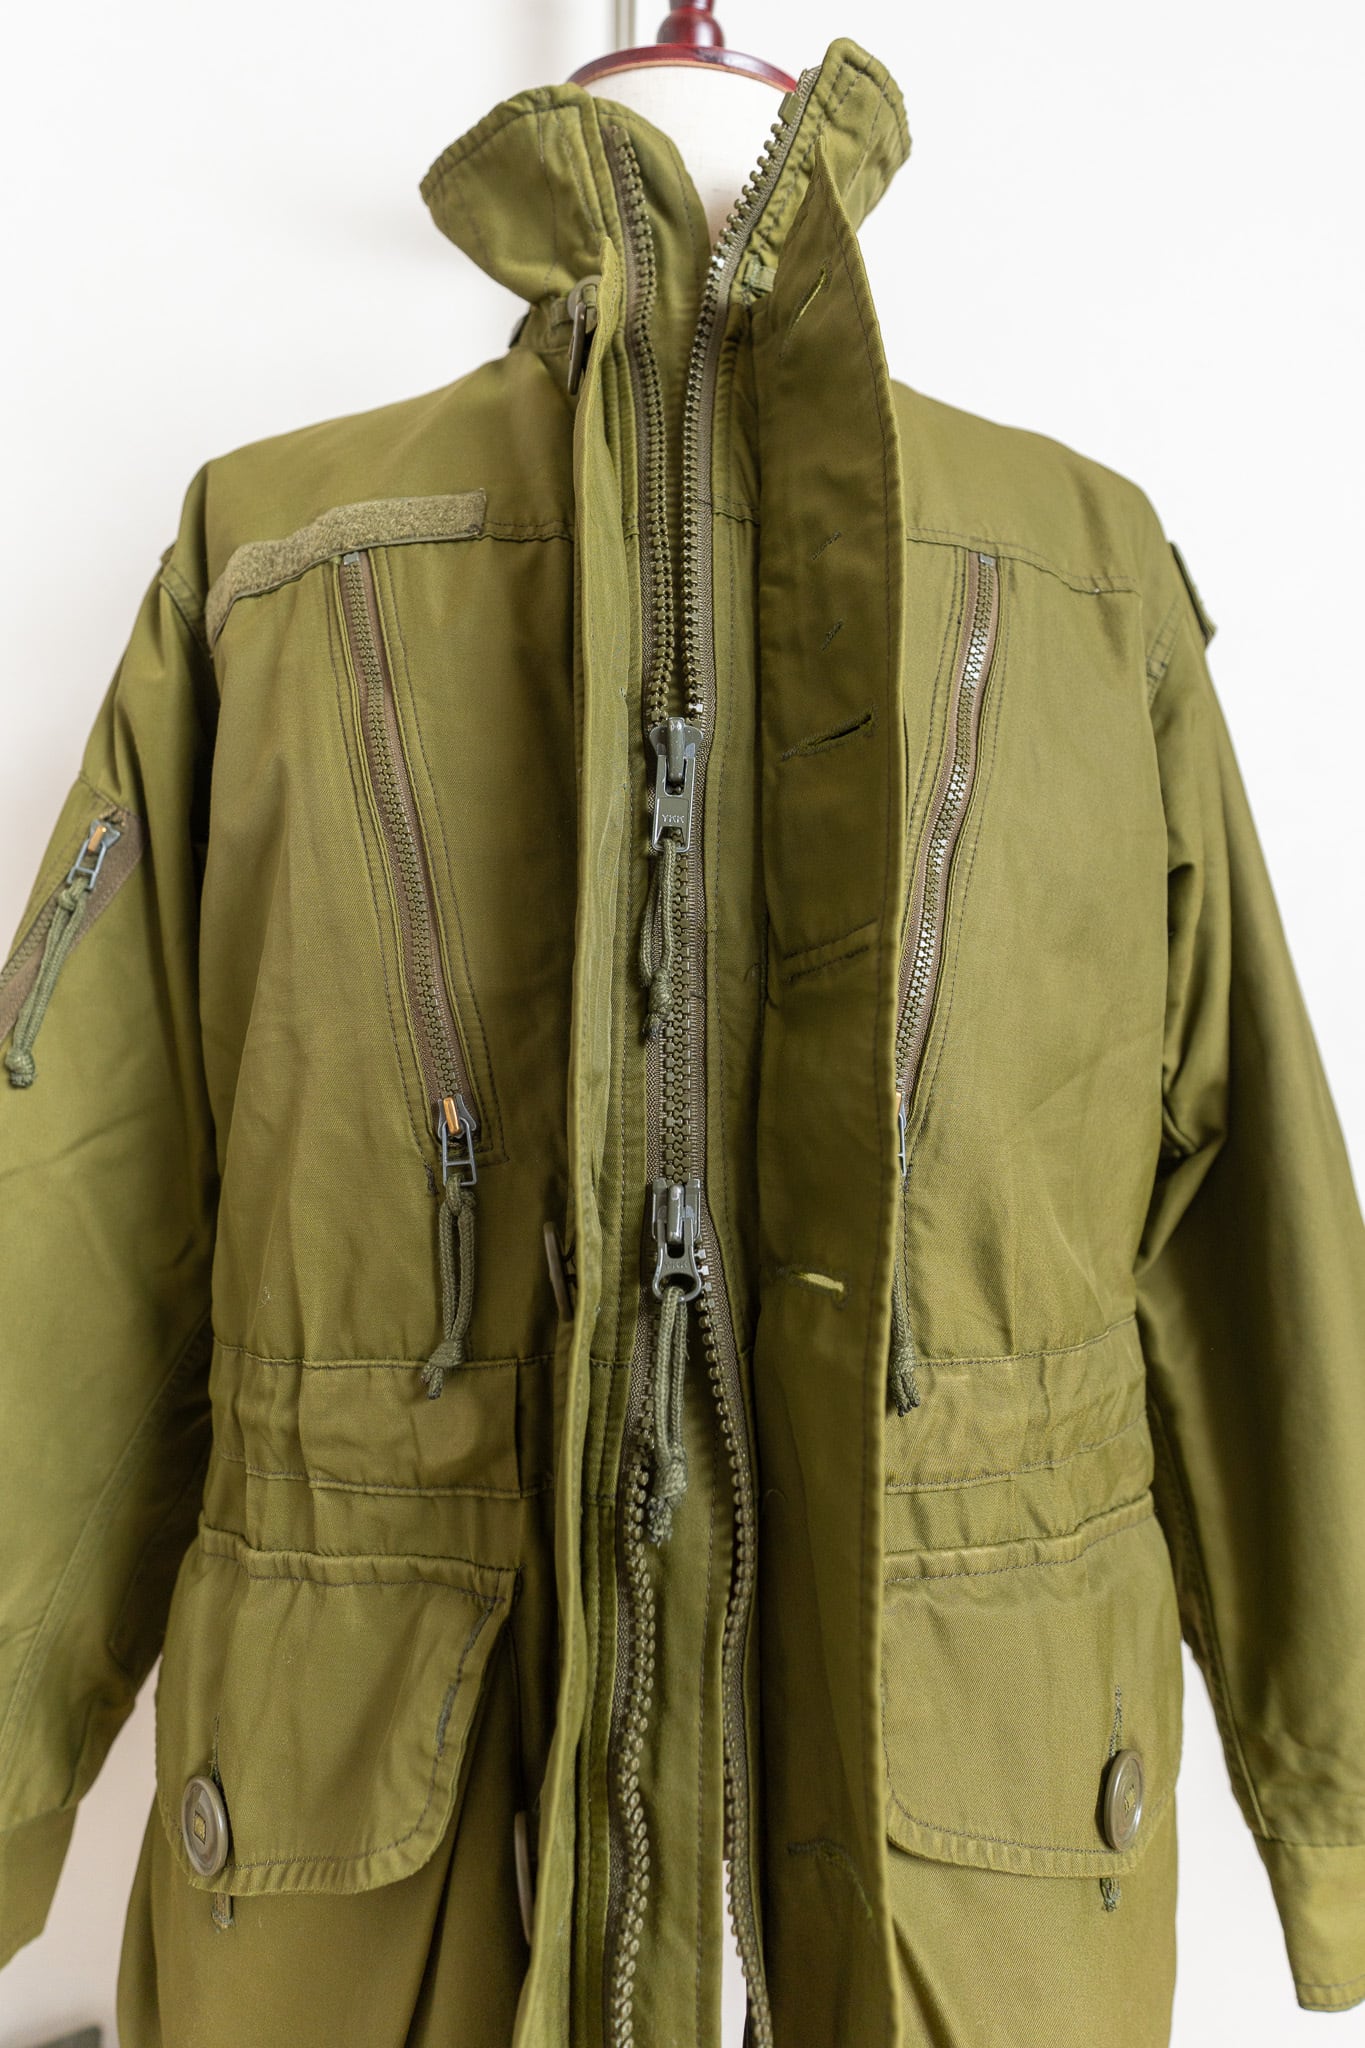 USED】Canadian Army IECS GORE-TEX Jacket No.423 実物 カナダ軍 ...